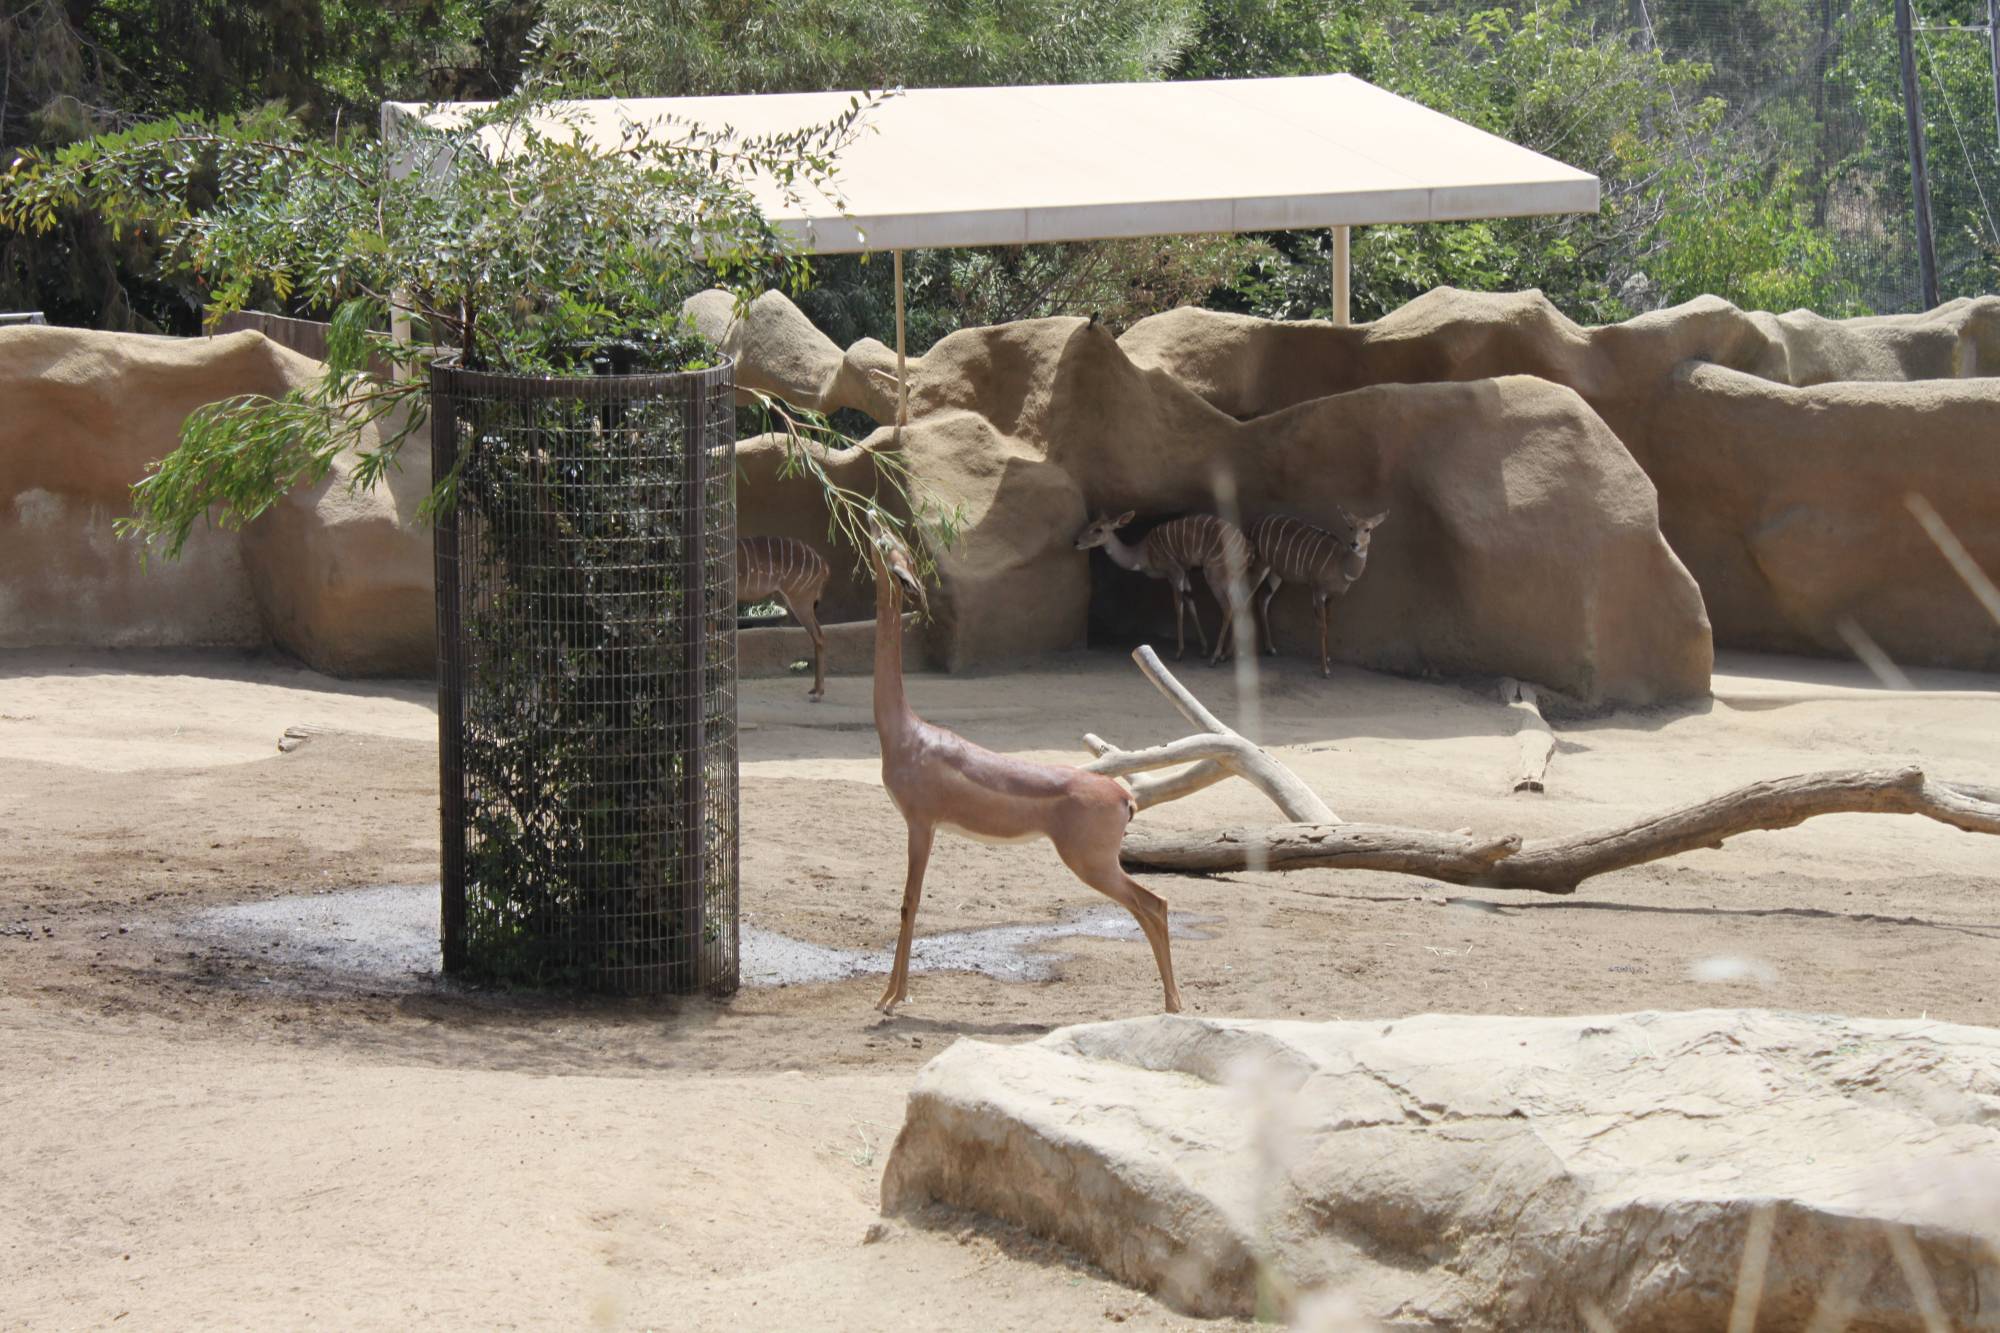 A gerenuk having a little snack at the San Diego Zoo